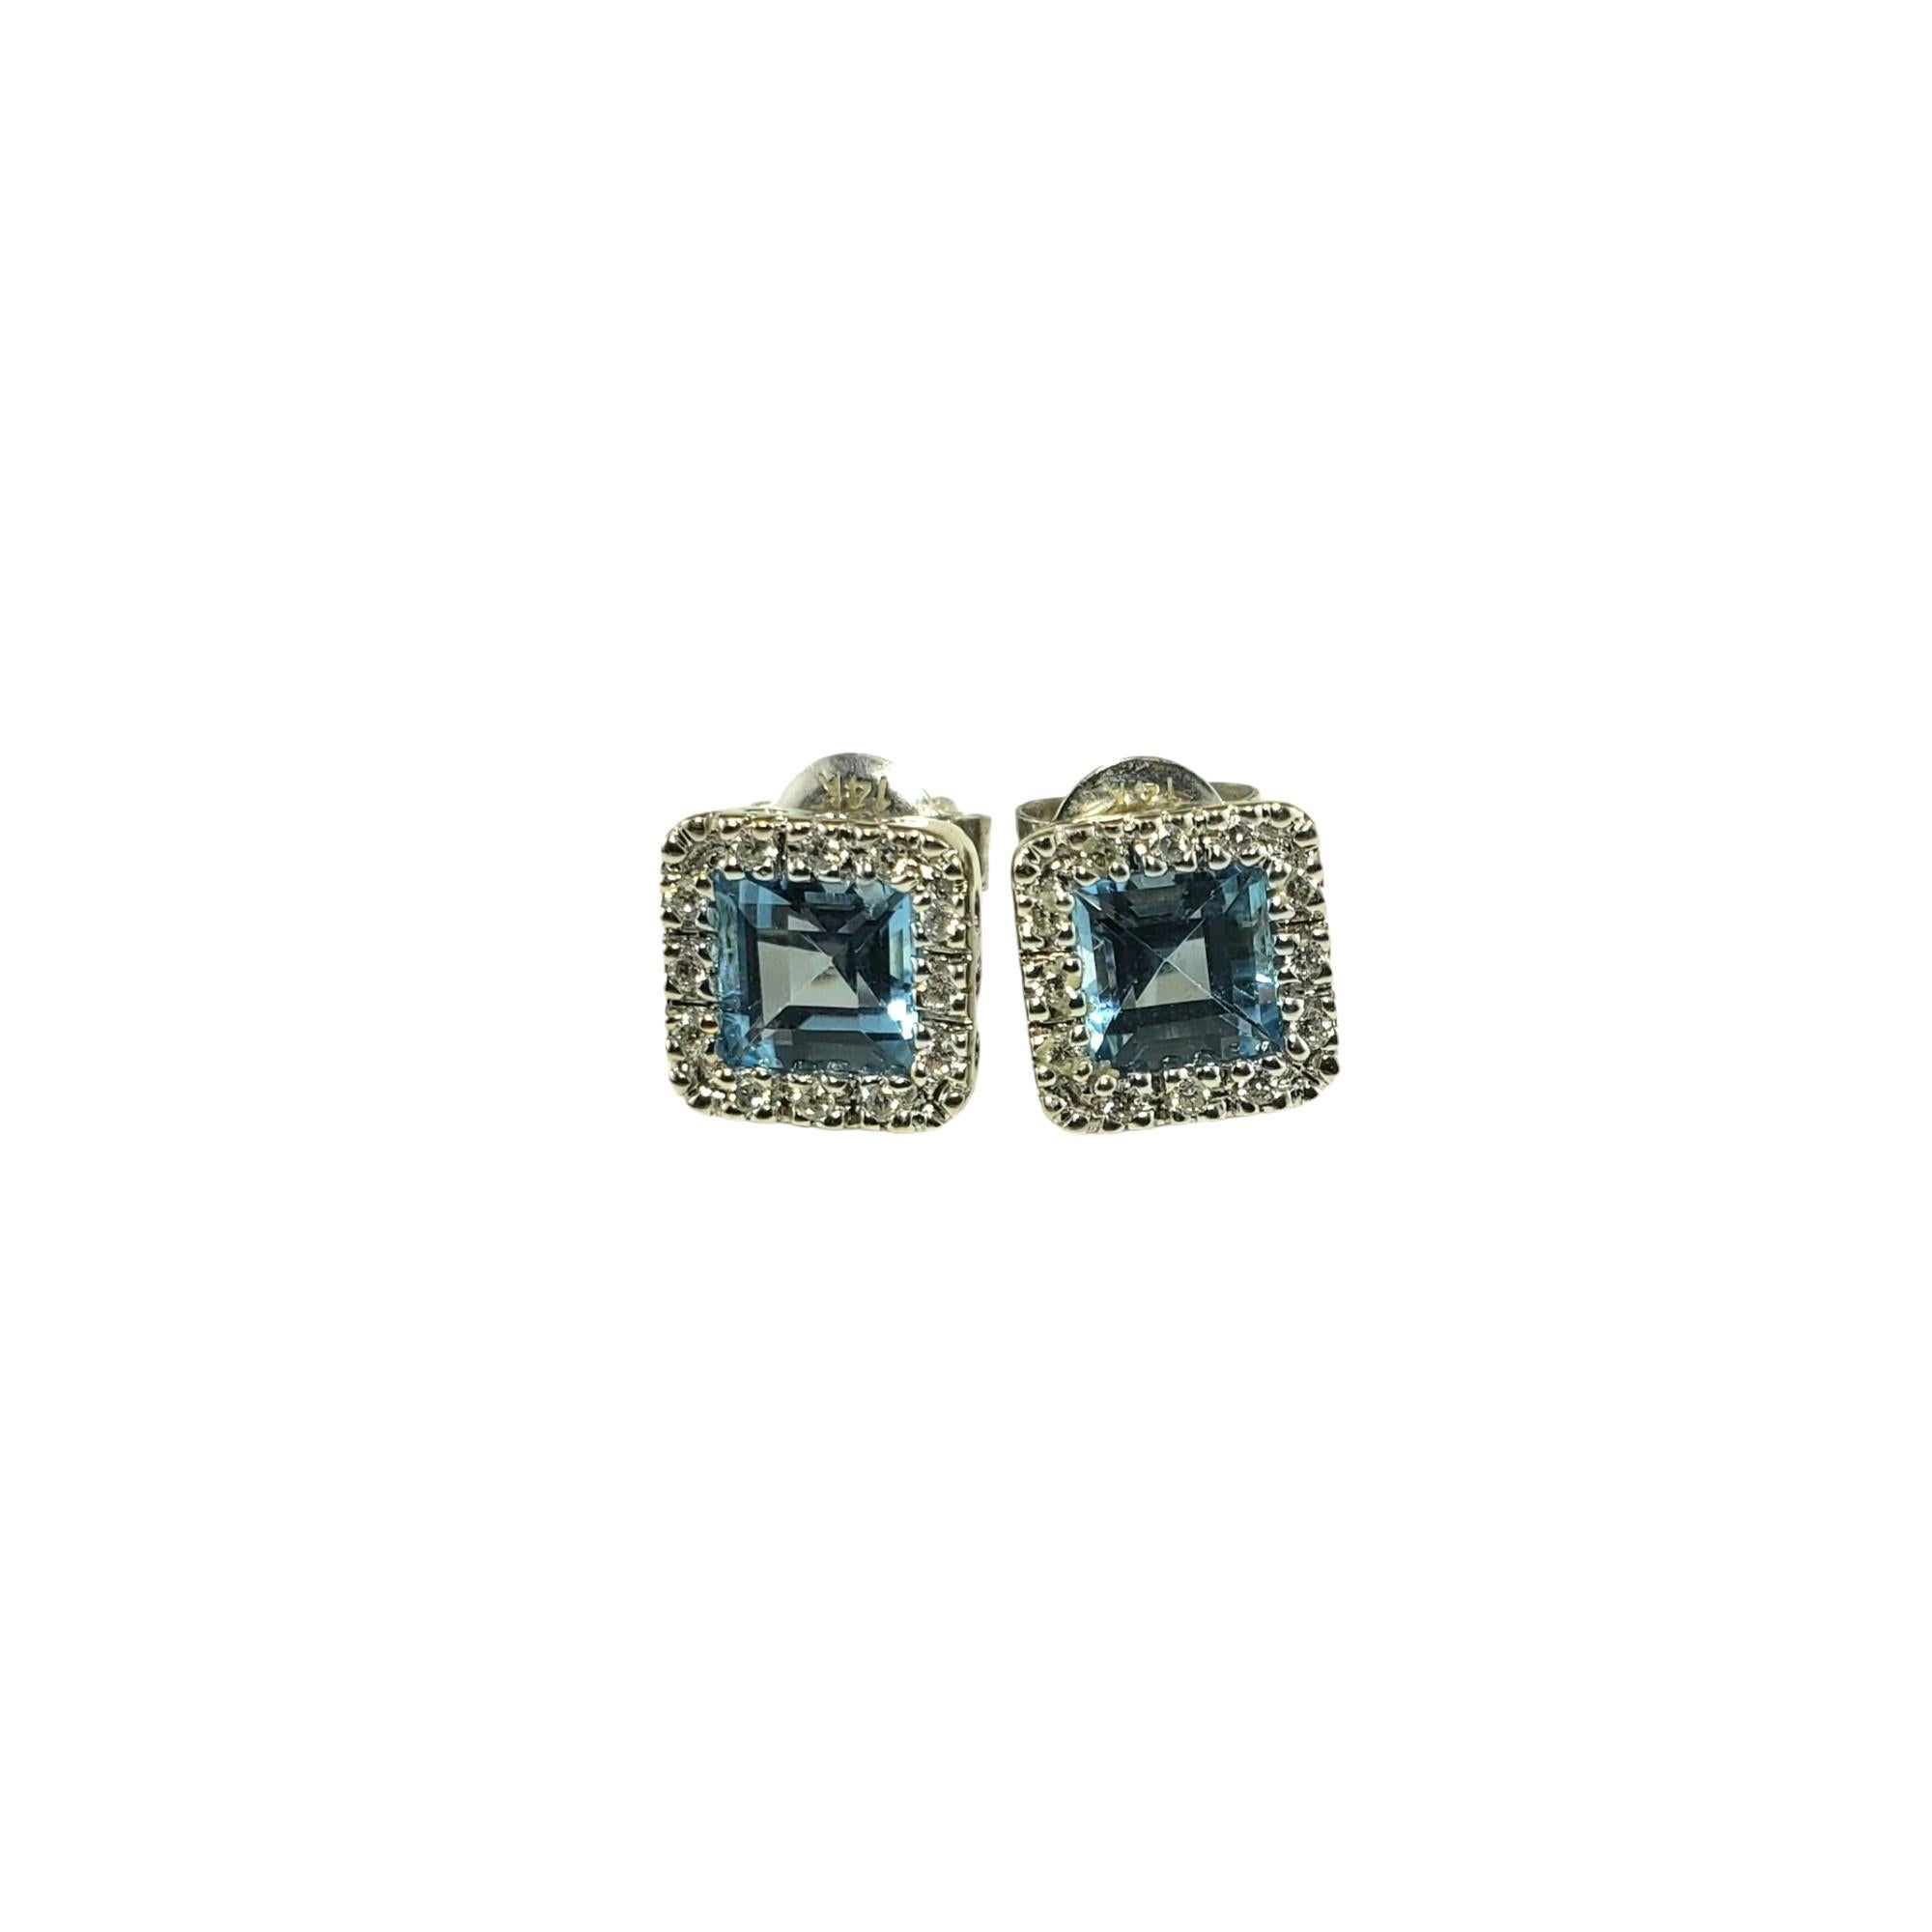 Vintage 14K White Gold Blue Topaz and Diamond Earrings Lab Certified-

These stunning earrings each feature one square cut blue topaz (5 mm x 5 mm) and 24 round brilliant cut diamonds set in classic 14K white gold.  Push back closures.

Total topaz